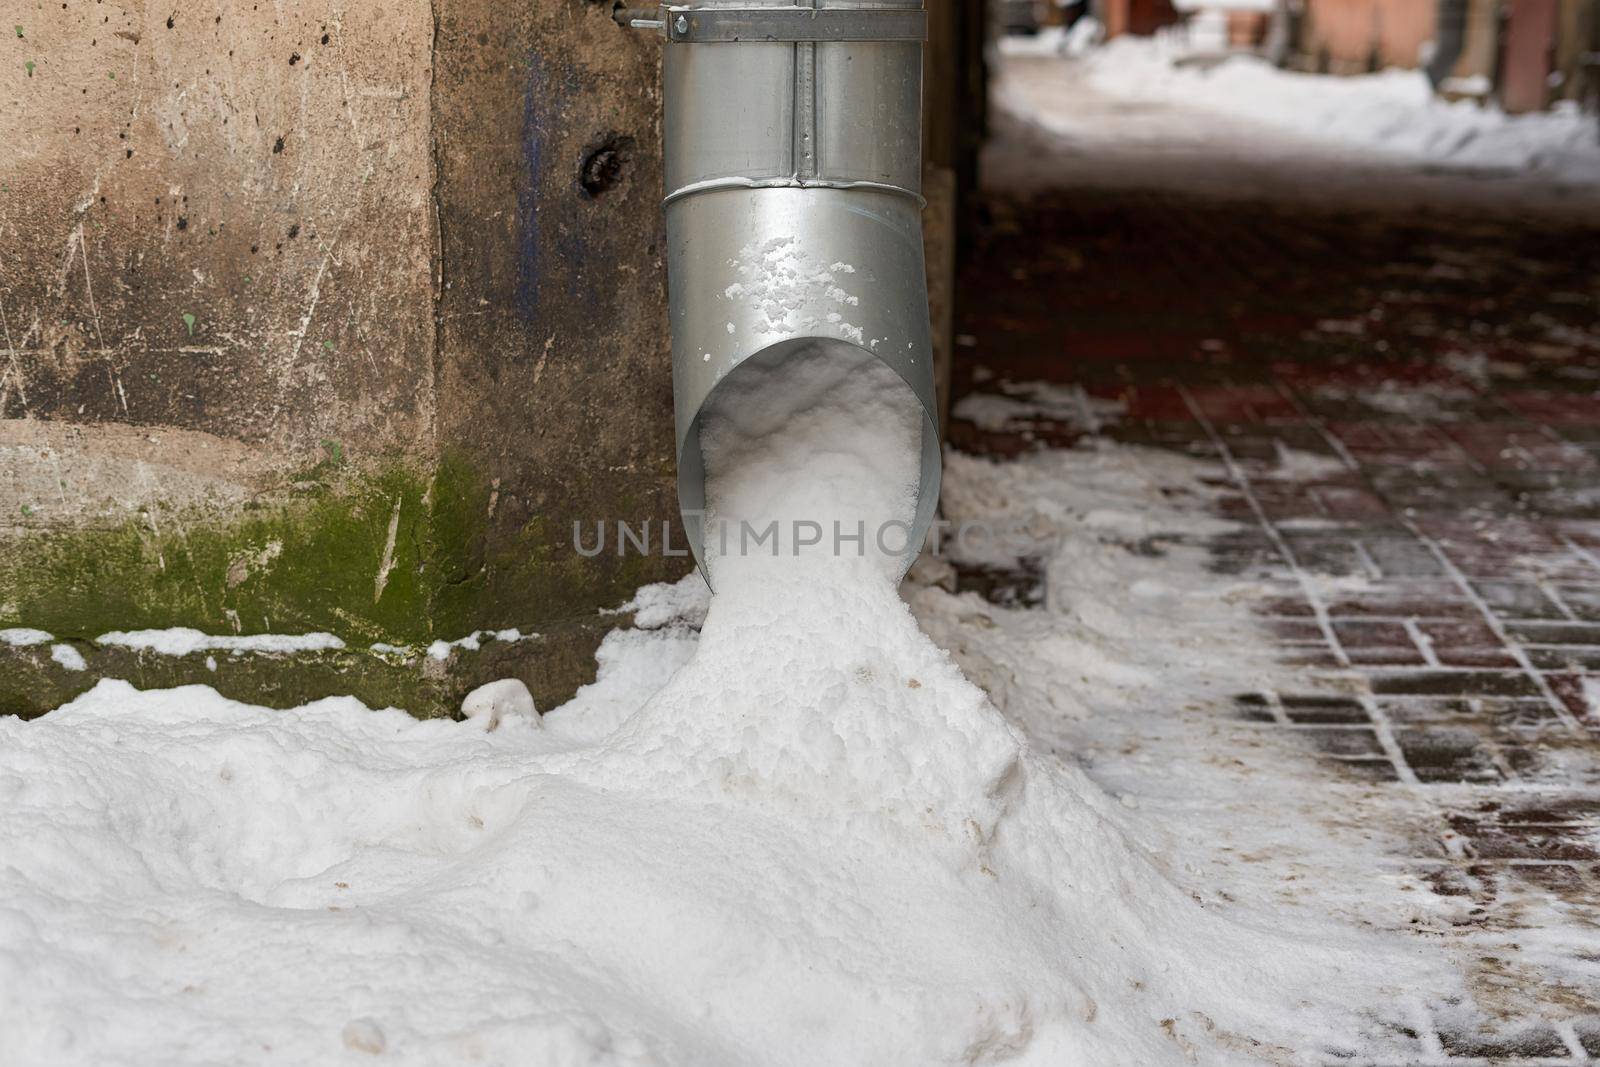 The metal drainpipe on the corner of the house is filled with snow. Close-up